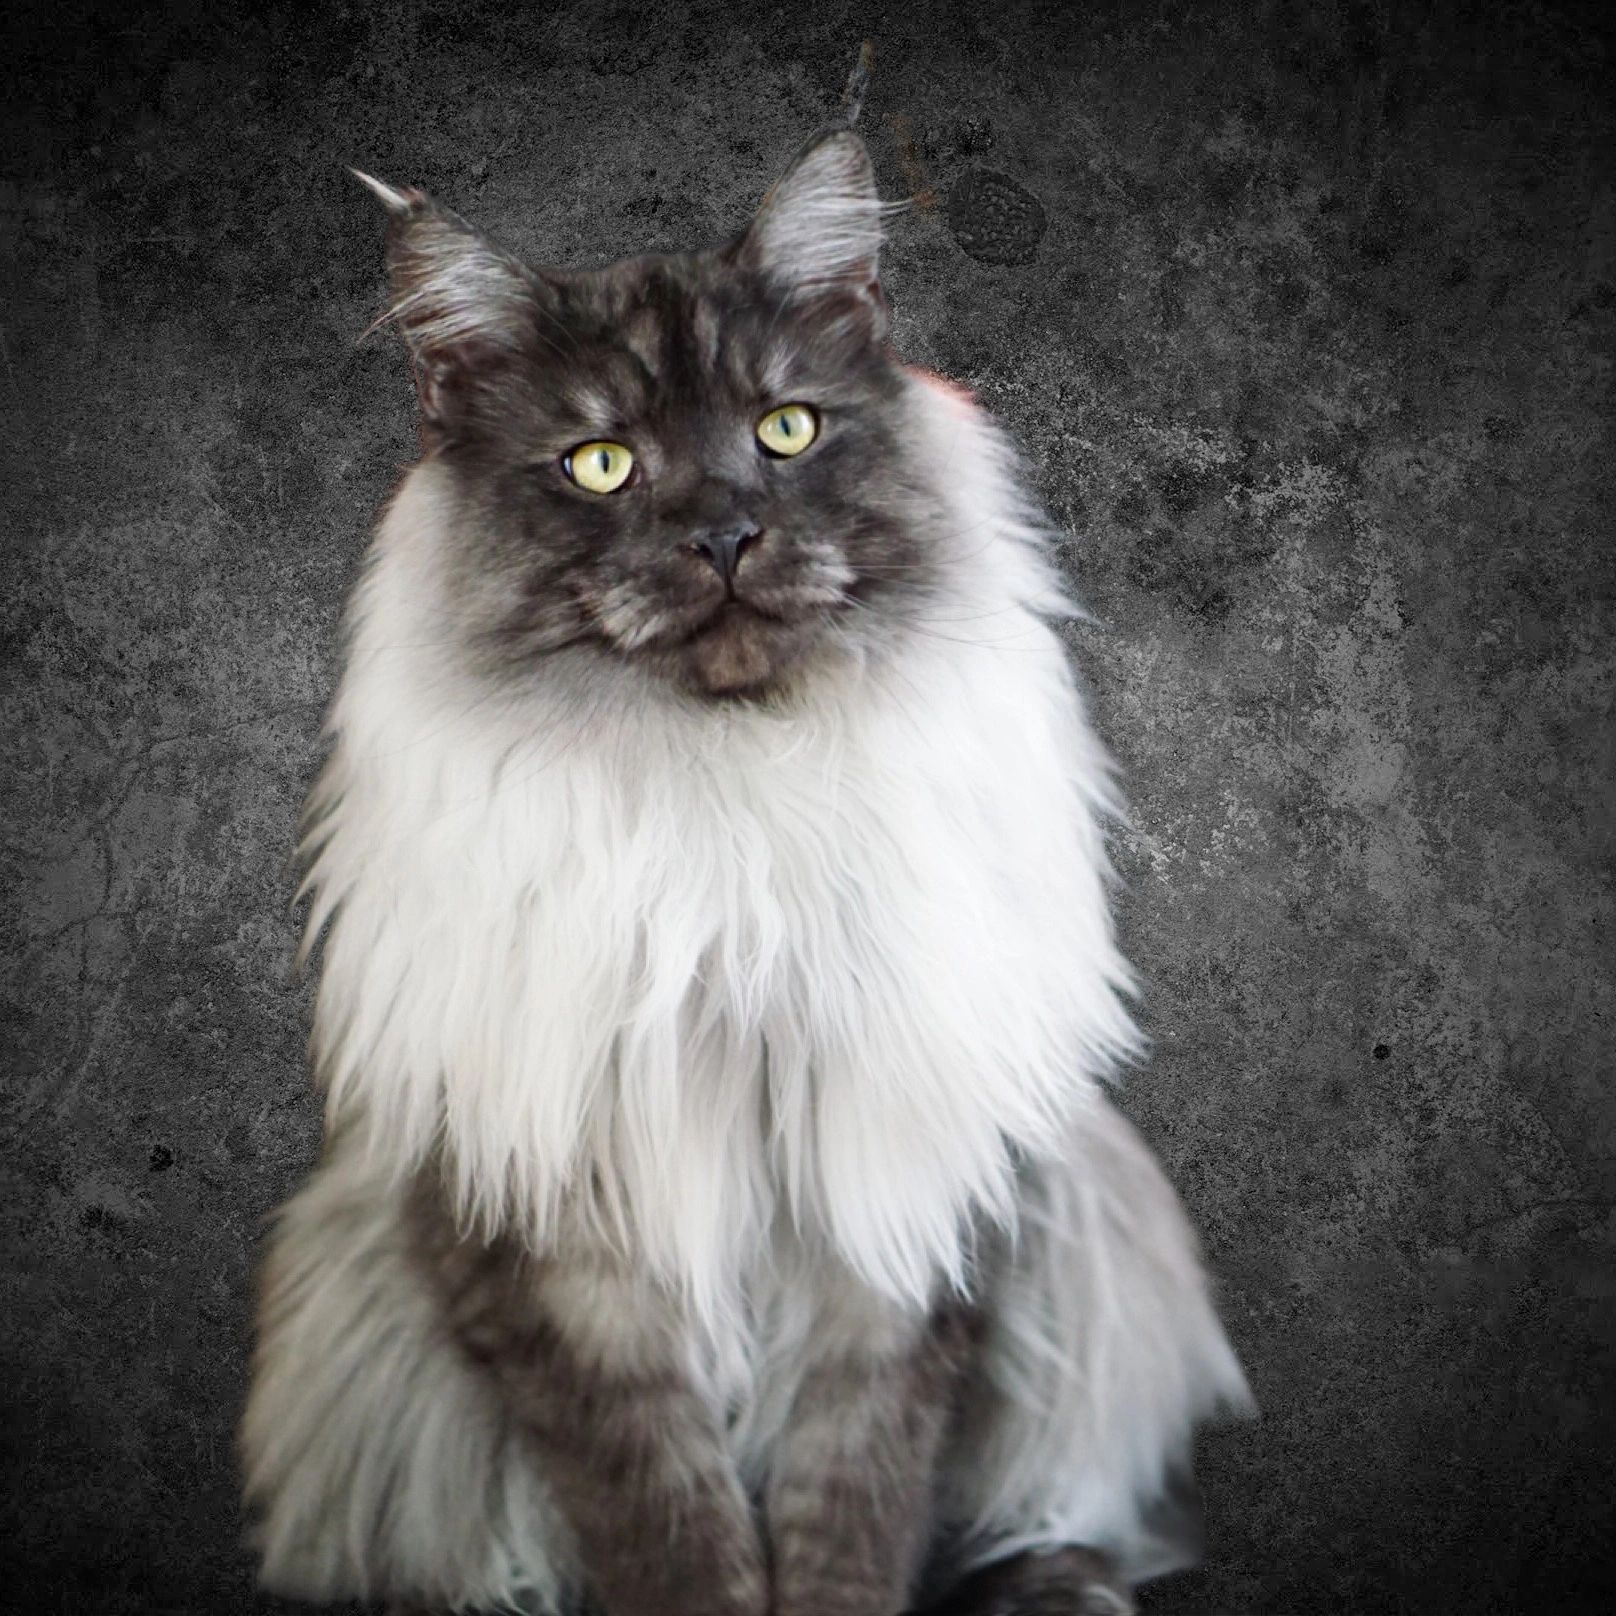 Maine Coon Cats For Sale From Atty Kats Tampa Maine Coon Kittens European Maine Coon Kittens Maine Coon Kittens